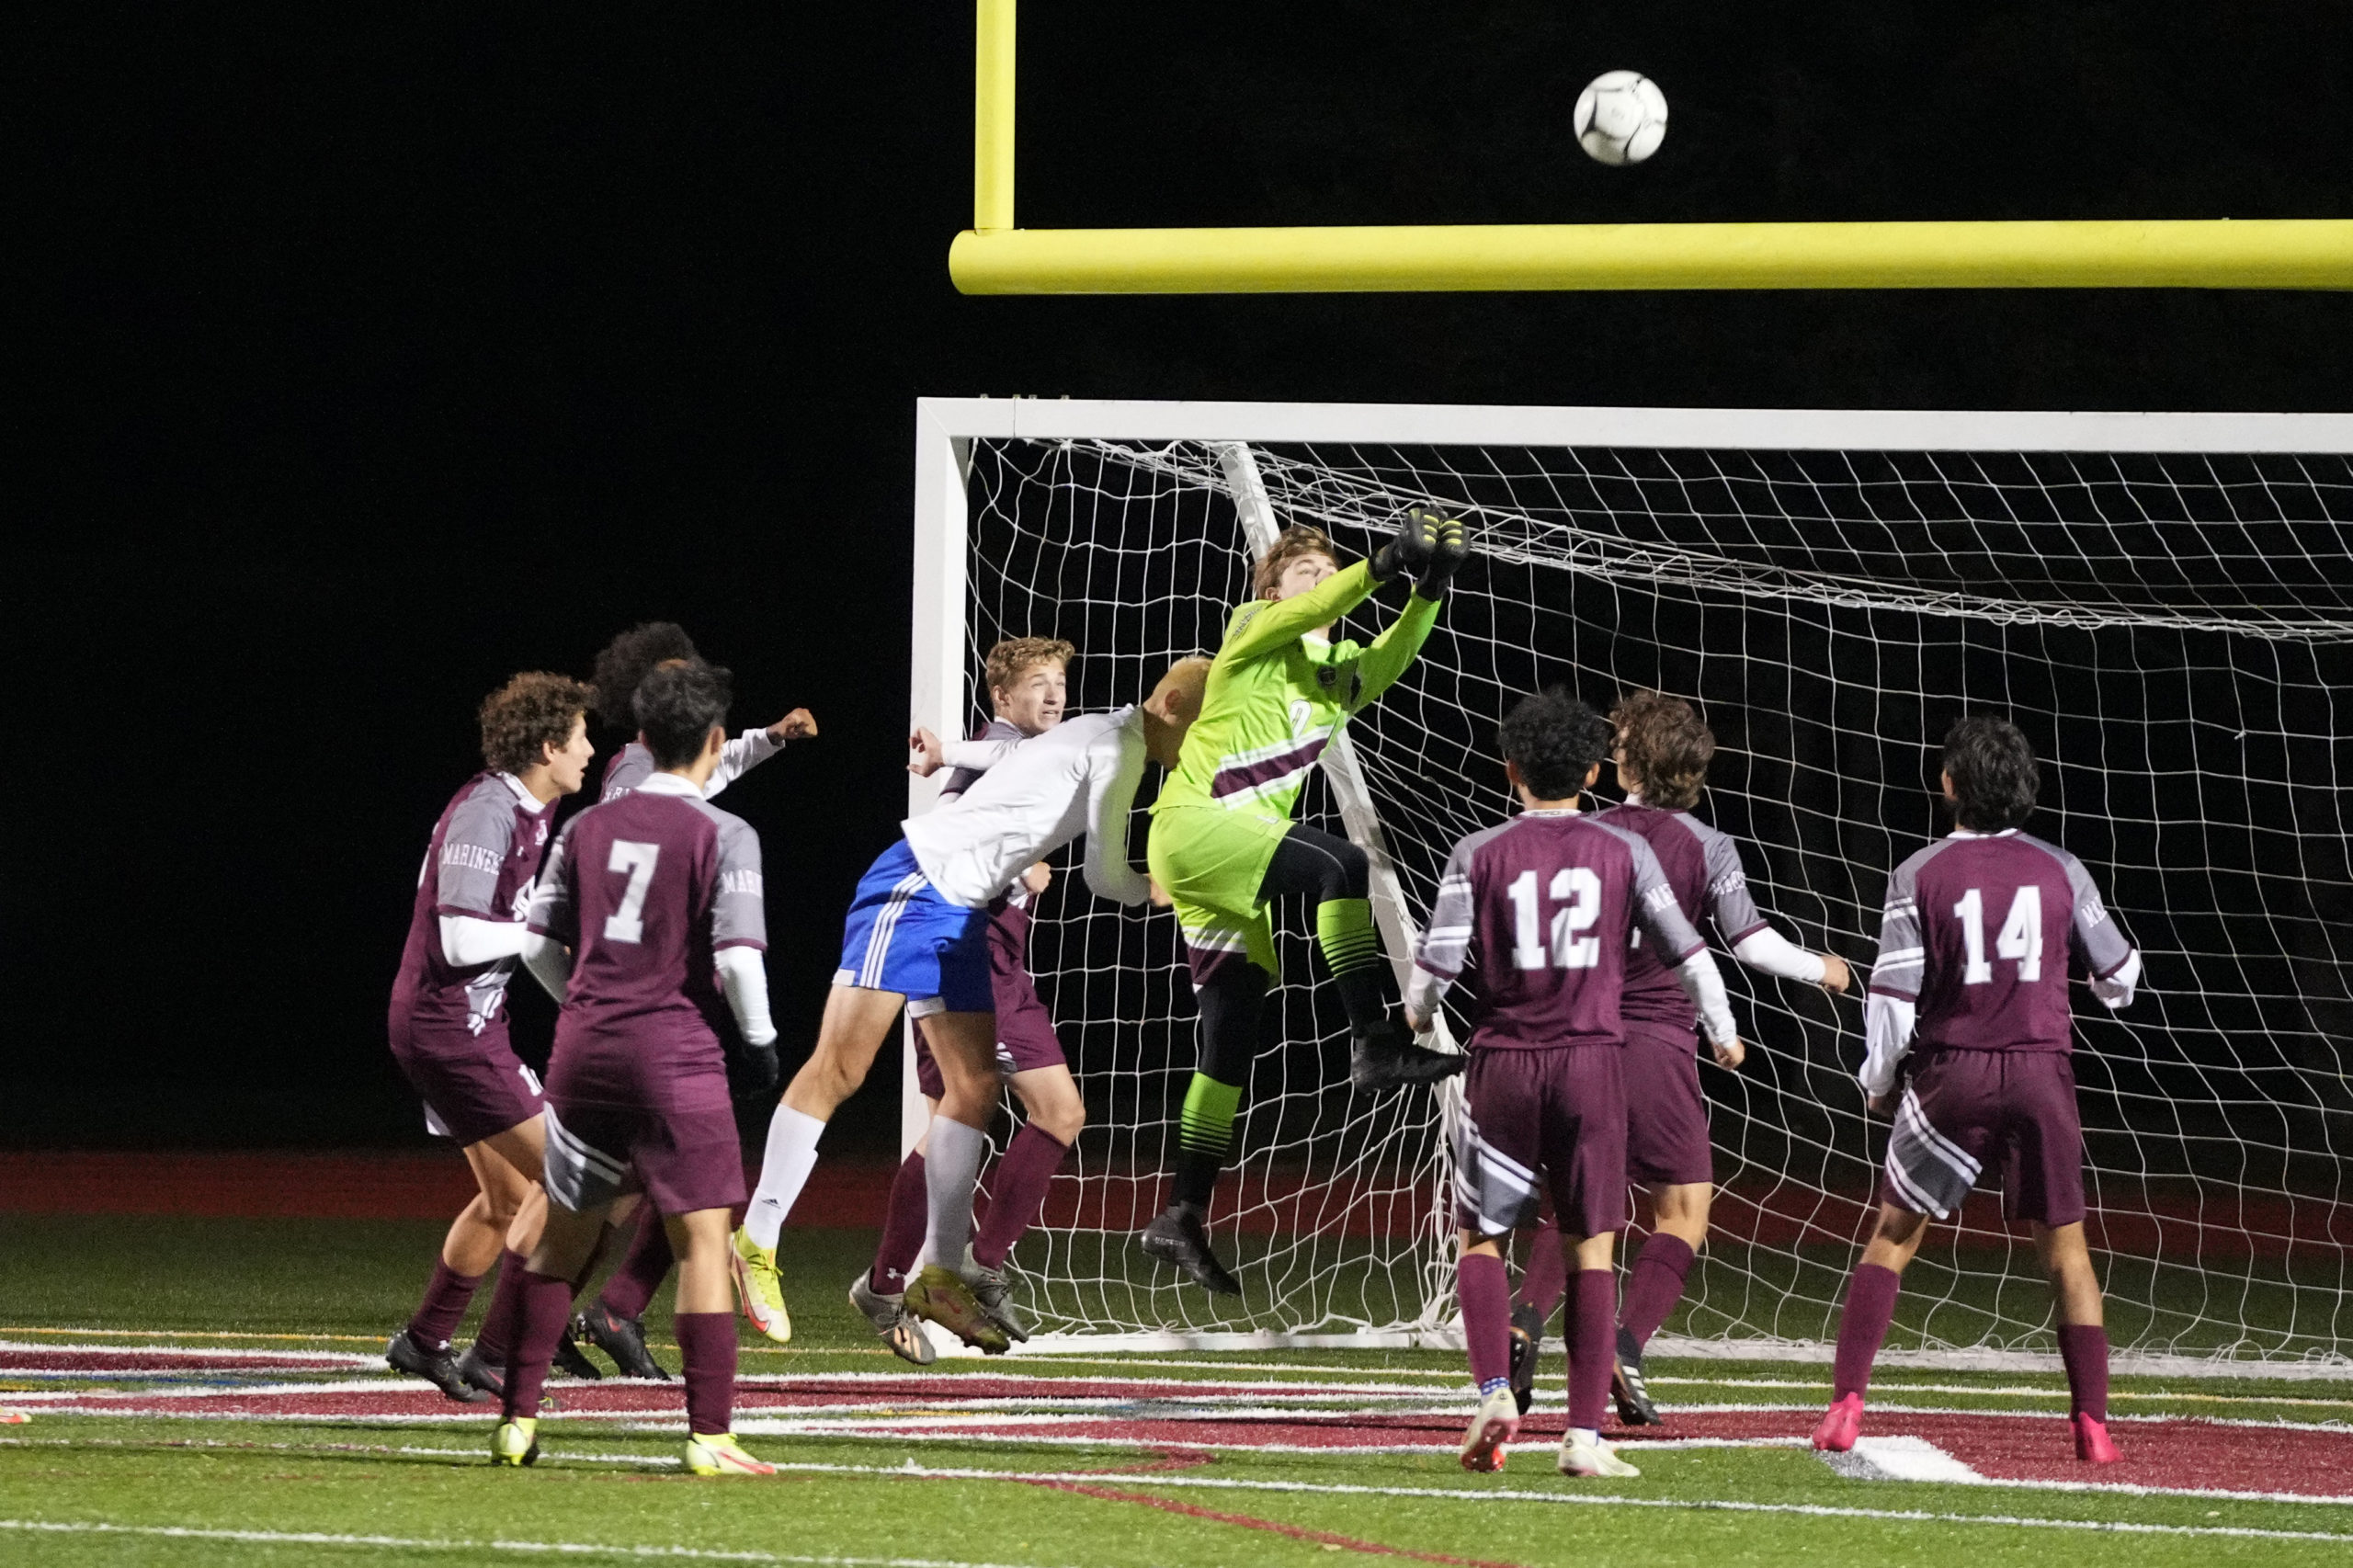 Southampton junior goalie Andy Panza comes out to punch a ball coming in.